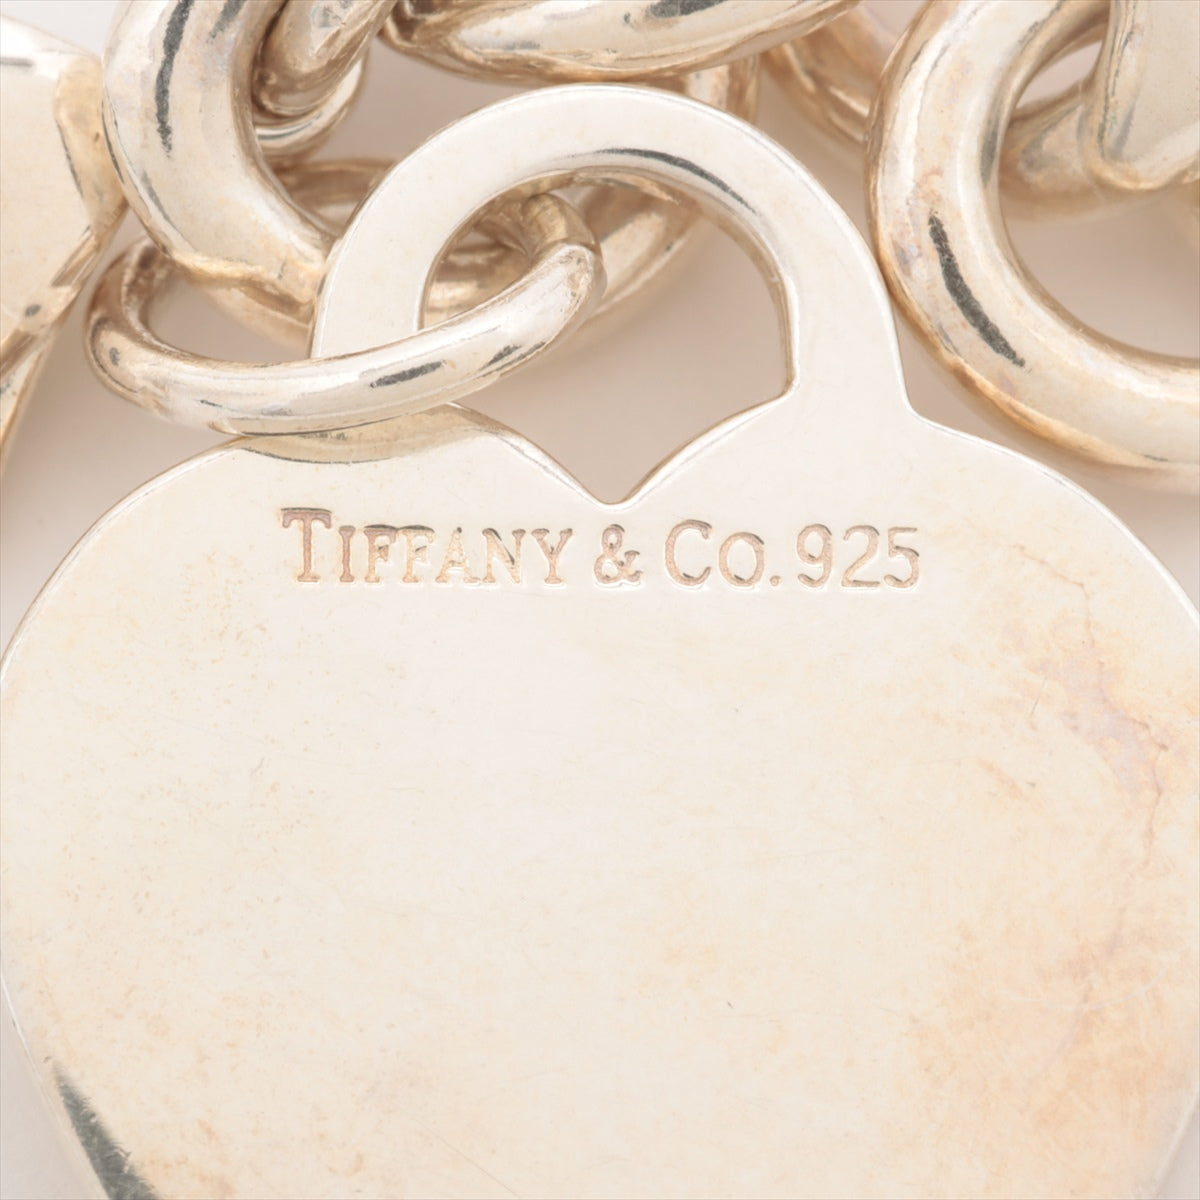 Tiffany Heart Tag Bracelet 925 34.7g Silver Wears Losing luster Discoloration Yes